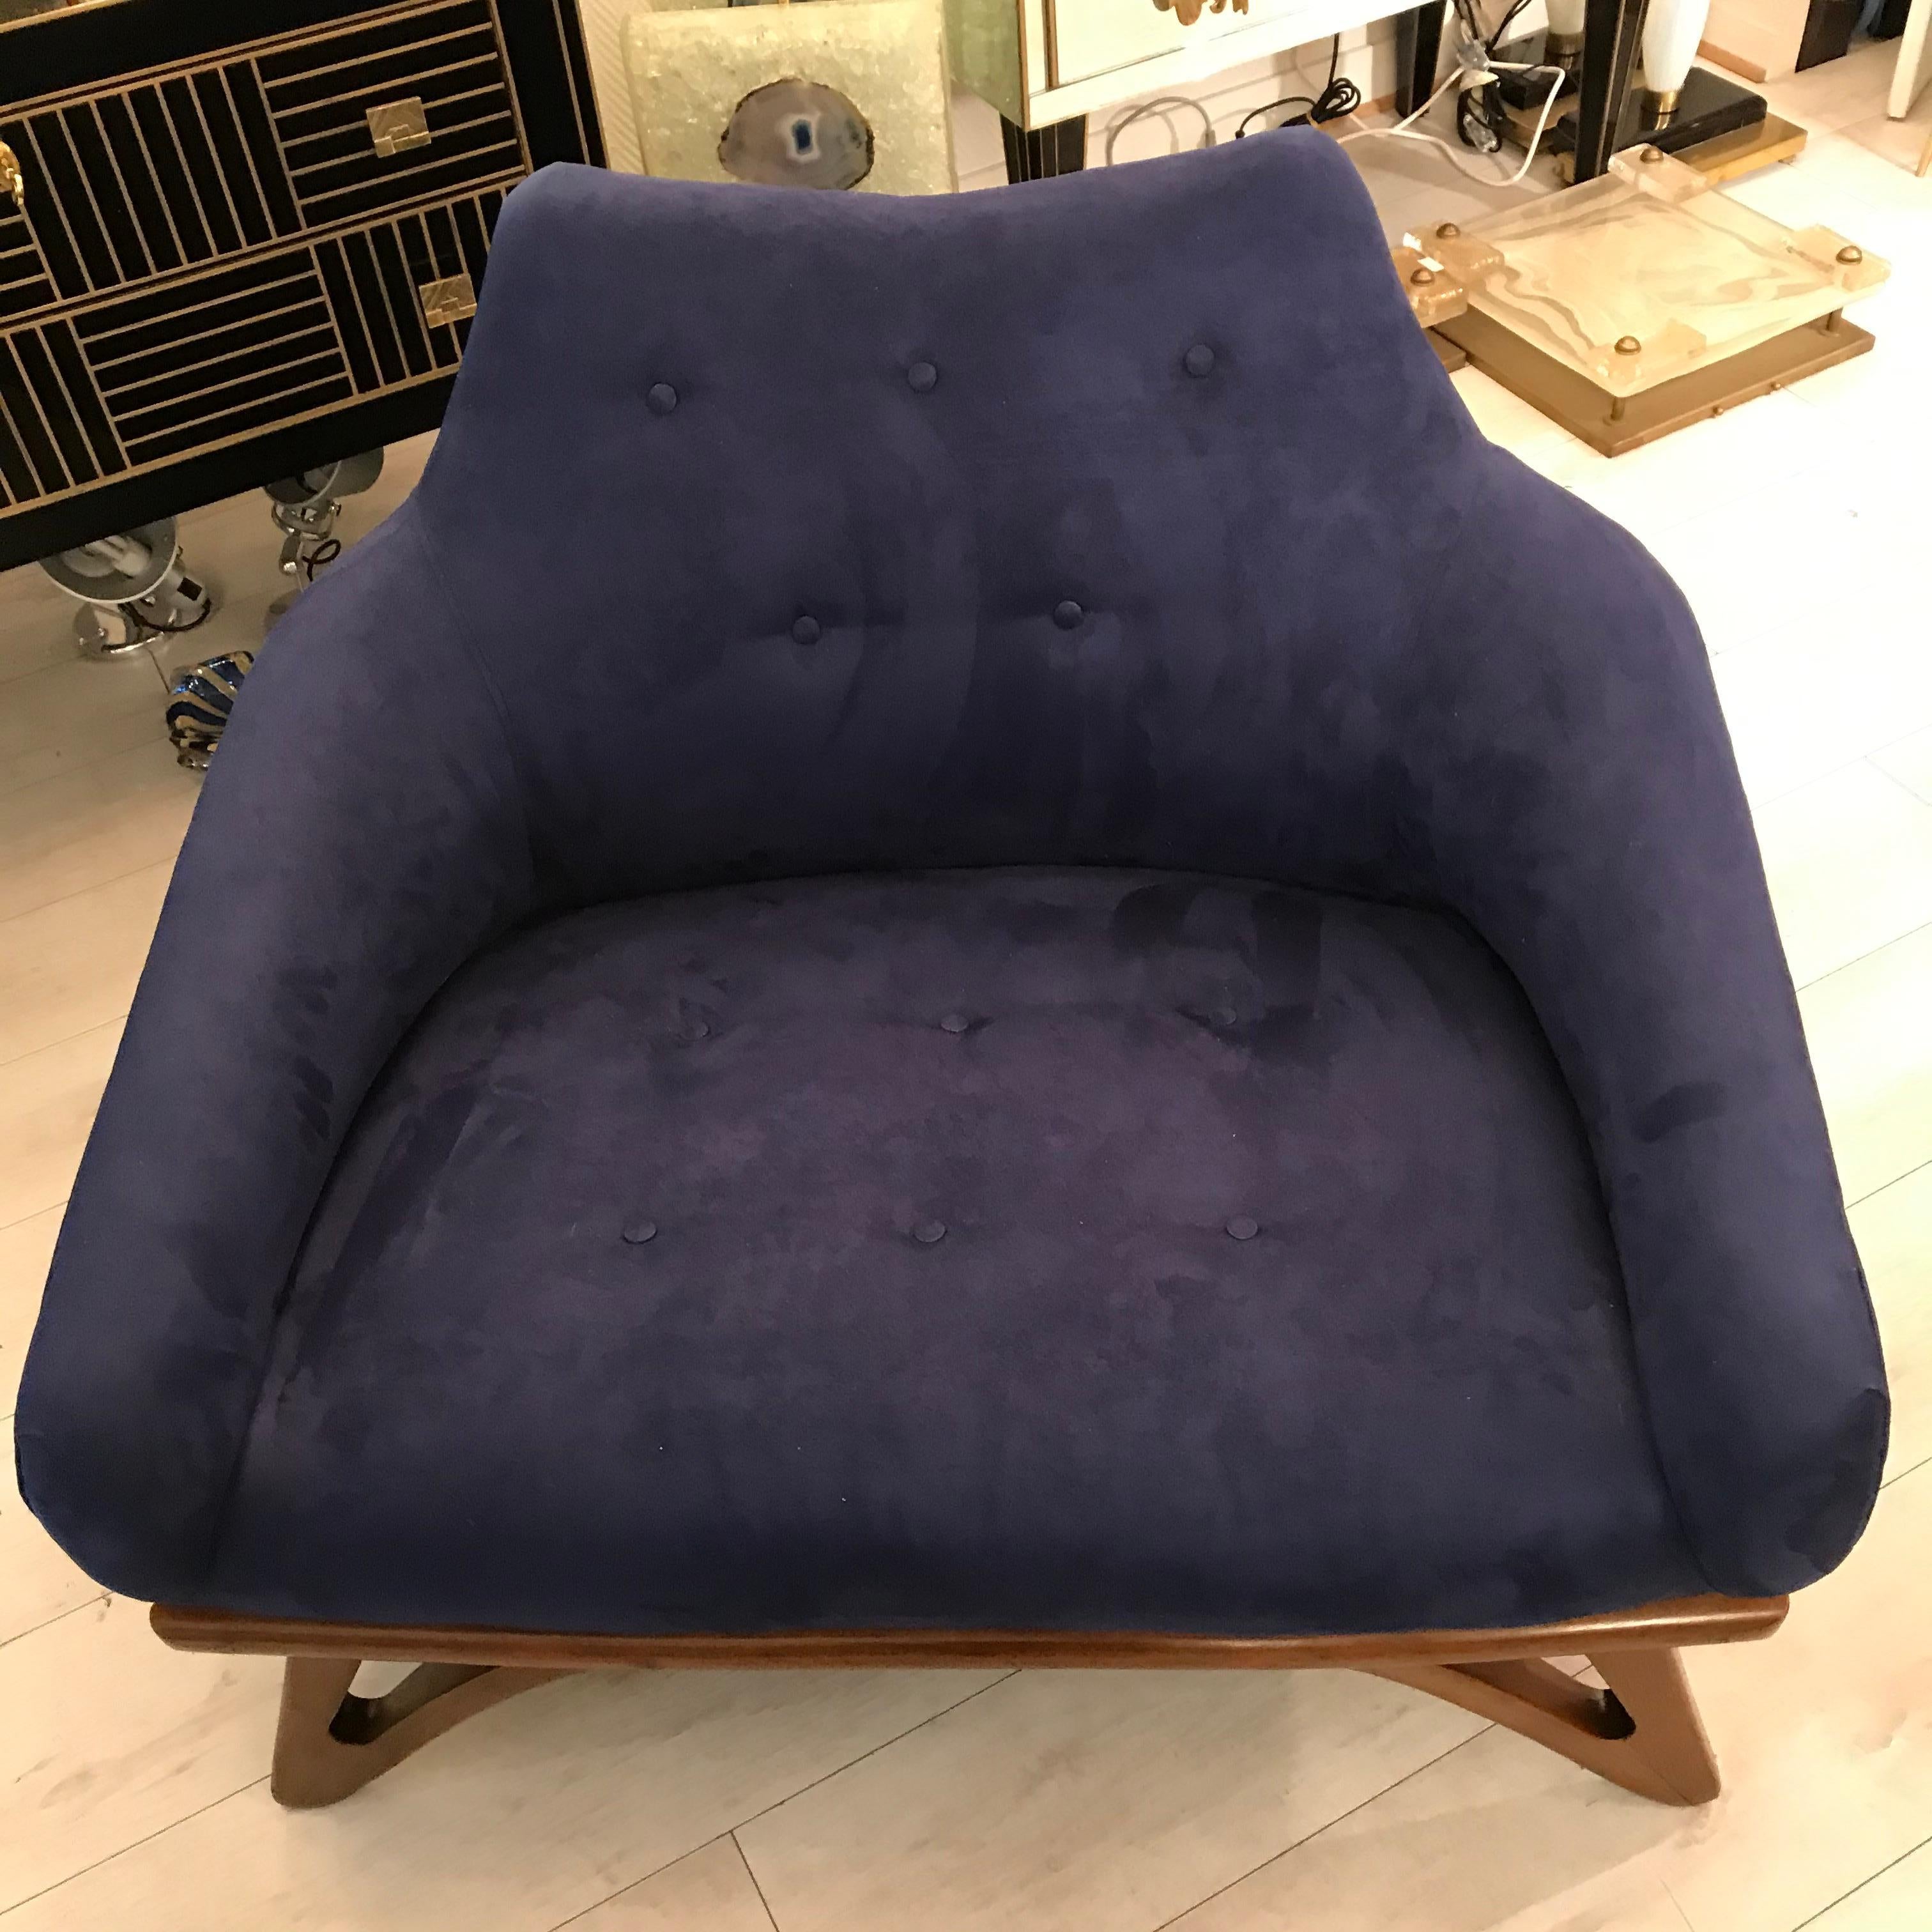 Awarded to Frank Lloyd Wright 
Large armchair 
circa1975
L 100 X H 80 X 75 P
Teak and alkantara navy blue 
Refurbished per upholsterer
Perfect condition 
Usa
1900 Euros.